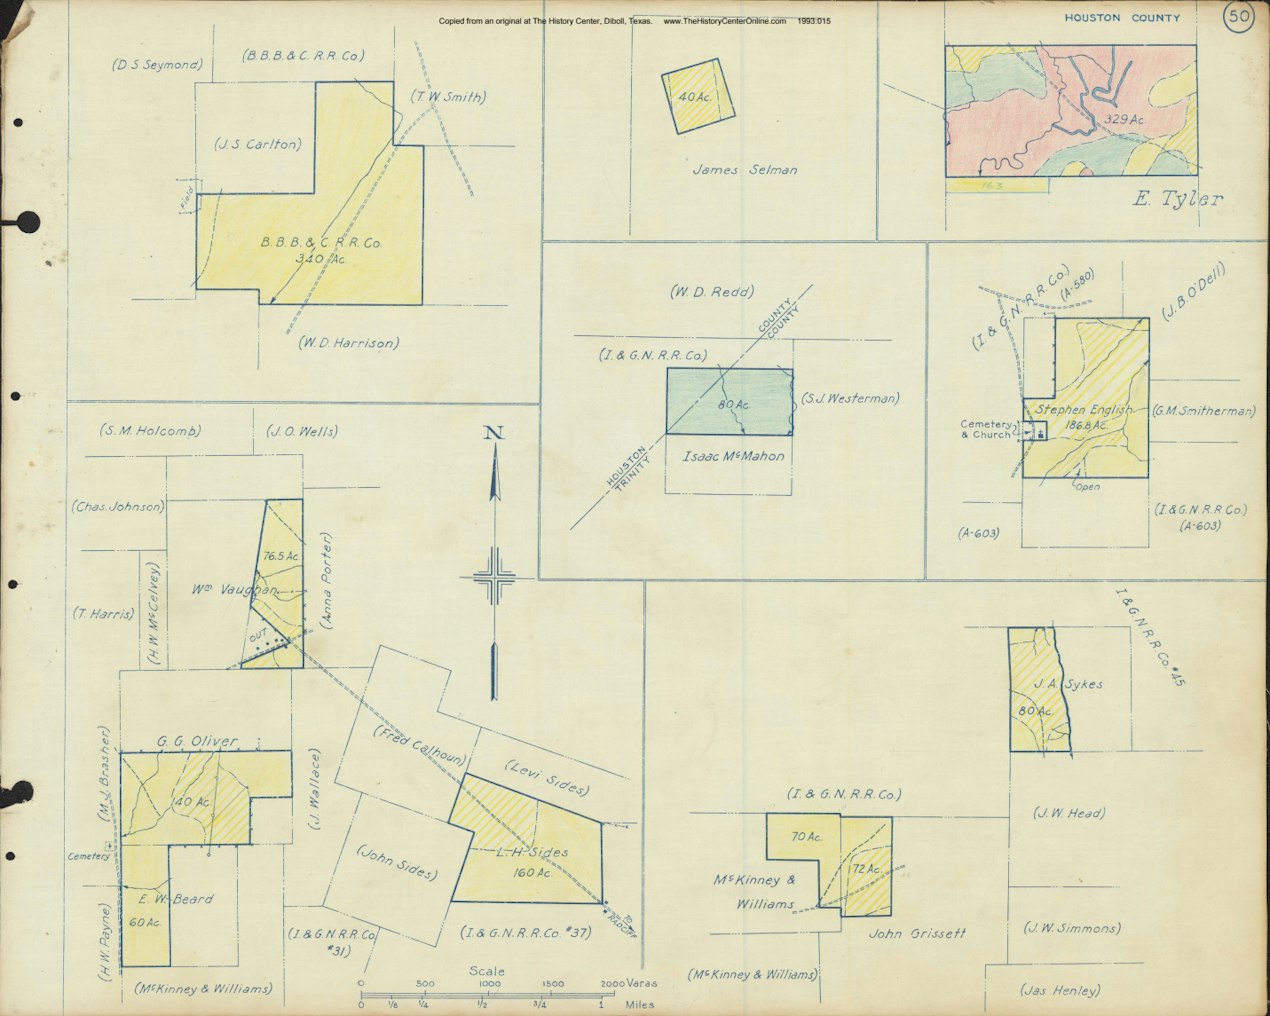 054 1945 Houston County Timberlands Map 050